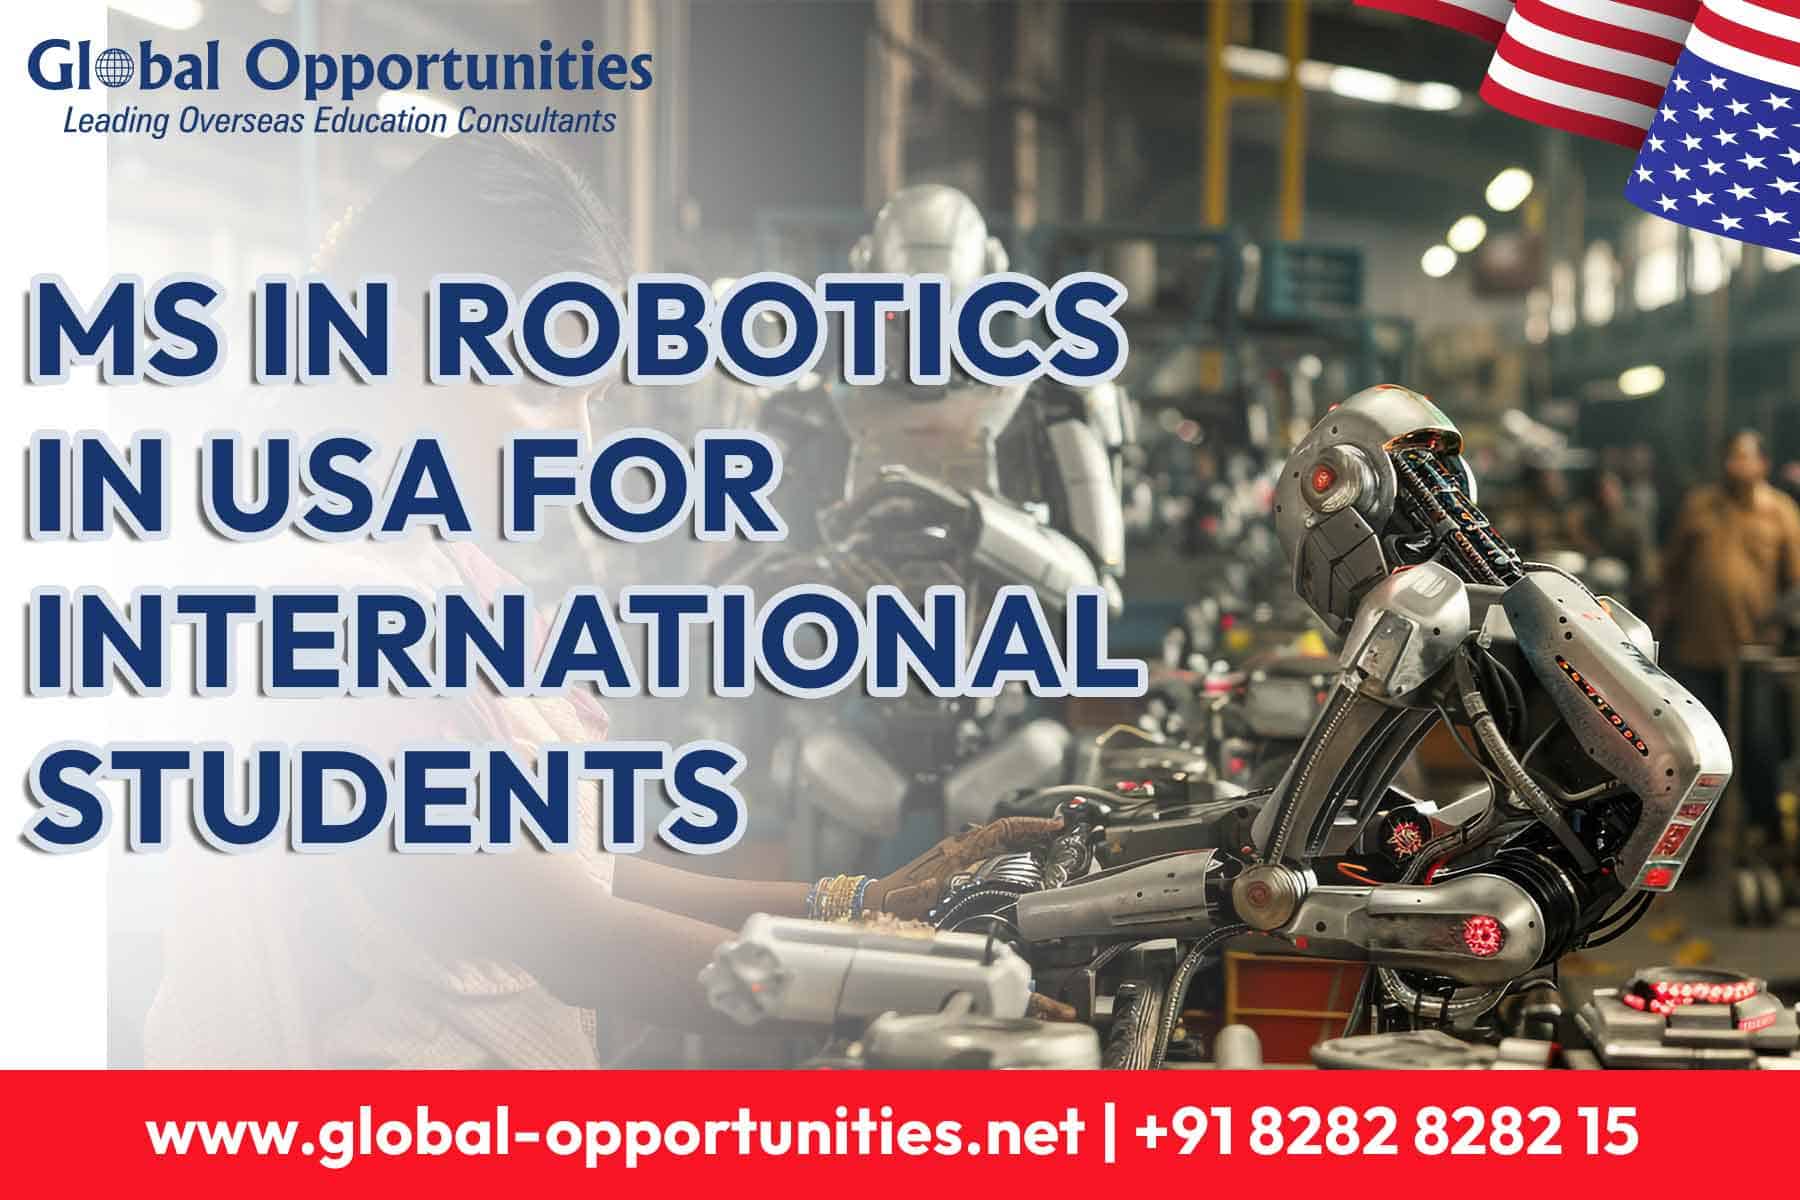 MS in Robotics in USA for International Students